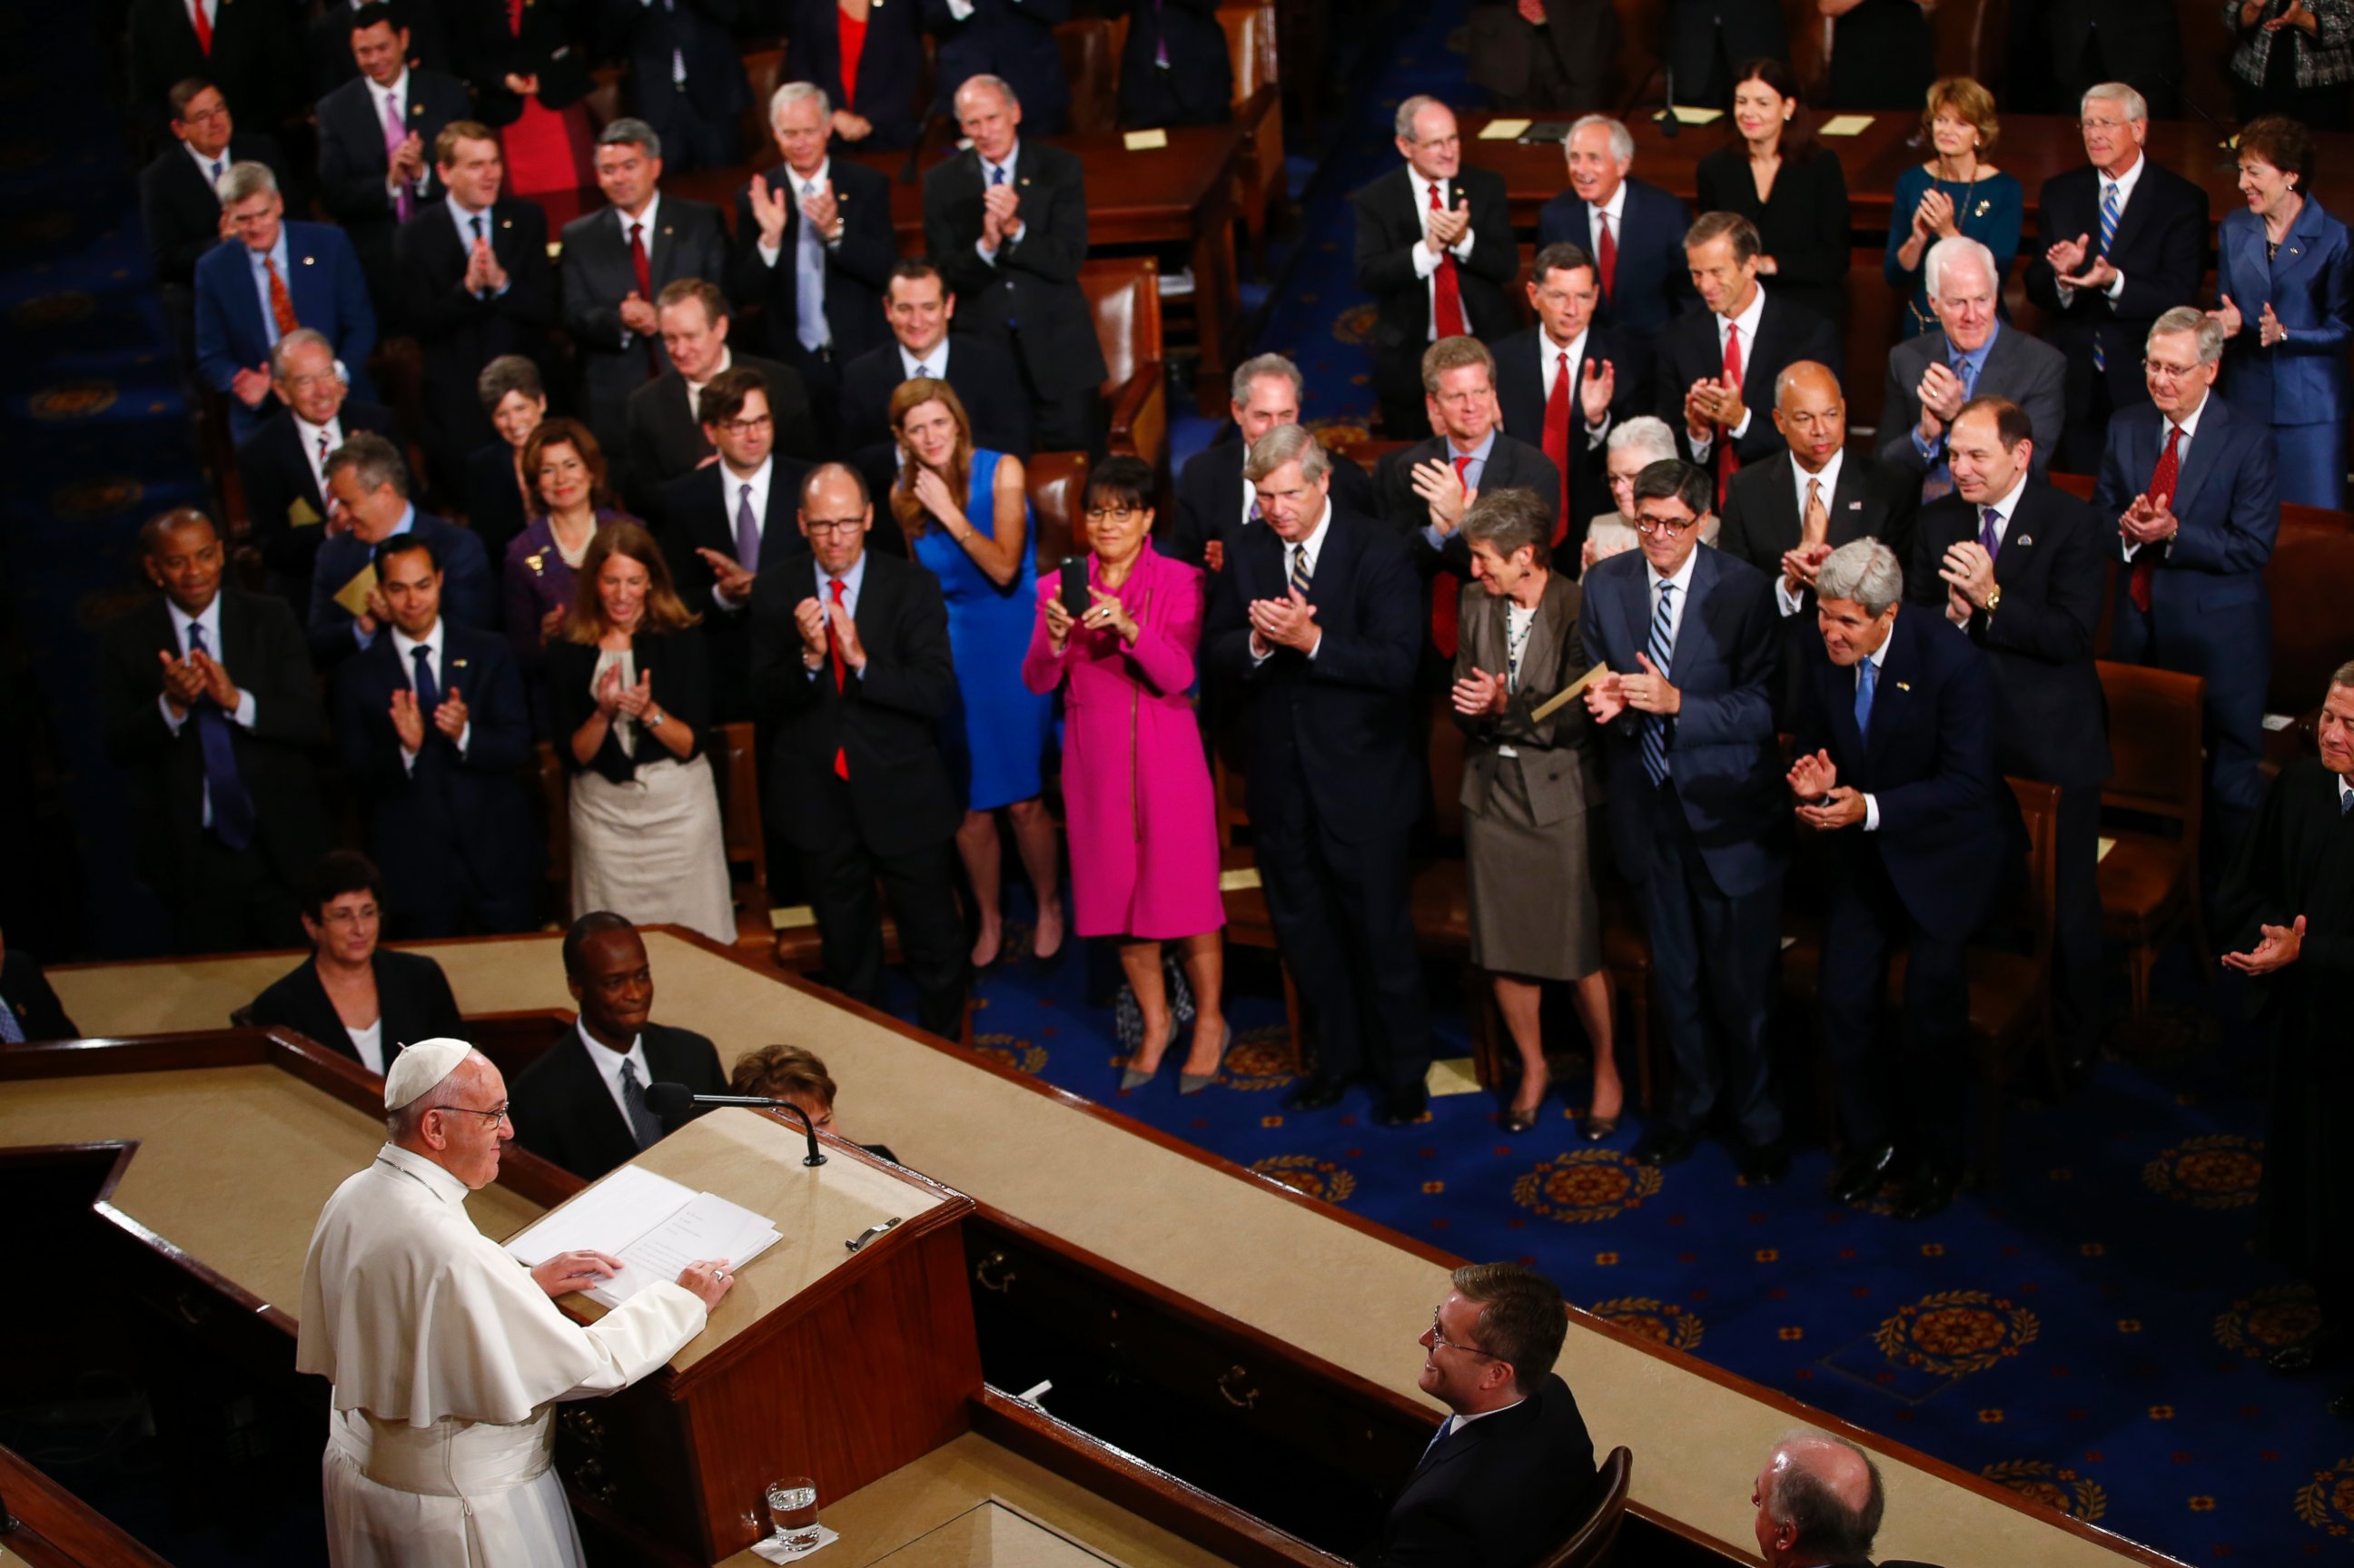 PHOTO: Pope Francis listens to applause as he addresses a joint meeting of Congress on Capitol Hill in Washington, Sept. 24, 2015.